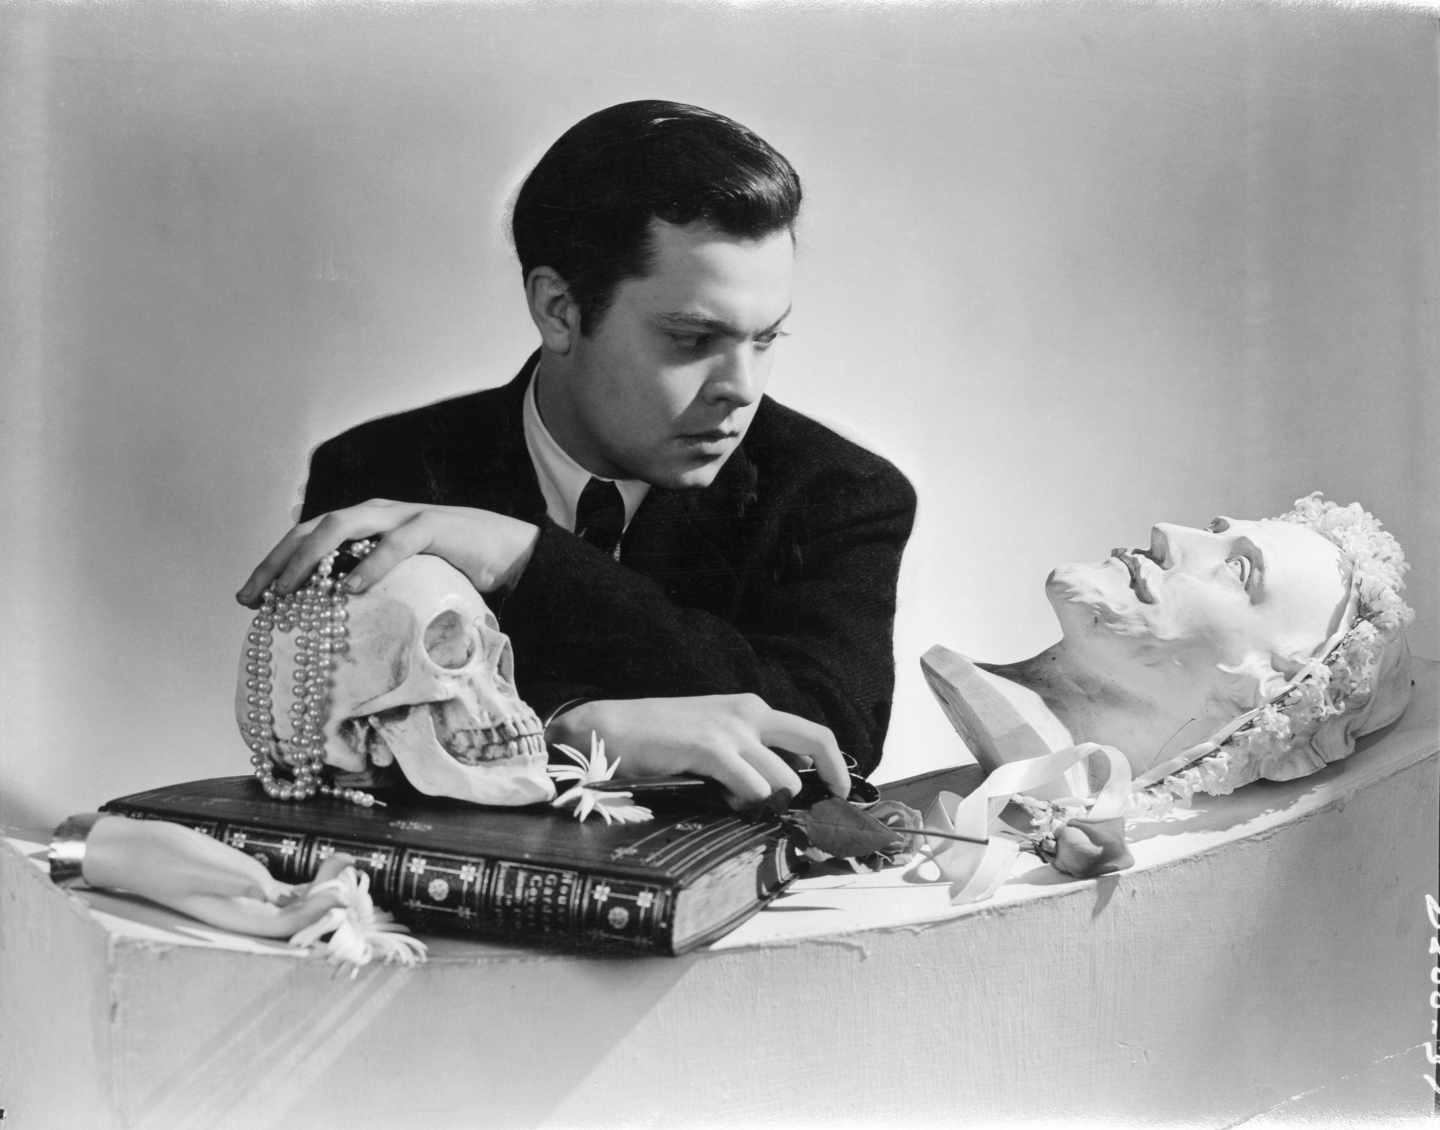 Cecil Beaton. Orson Welles, 1937 ©The Cecil Beaton Studio Archive at Sotheby’s